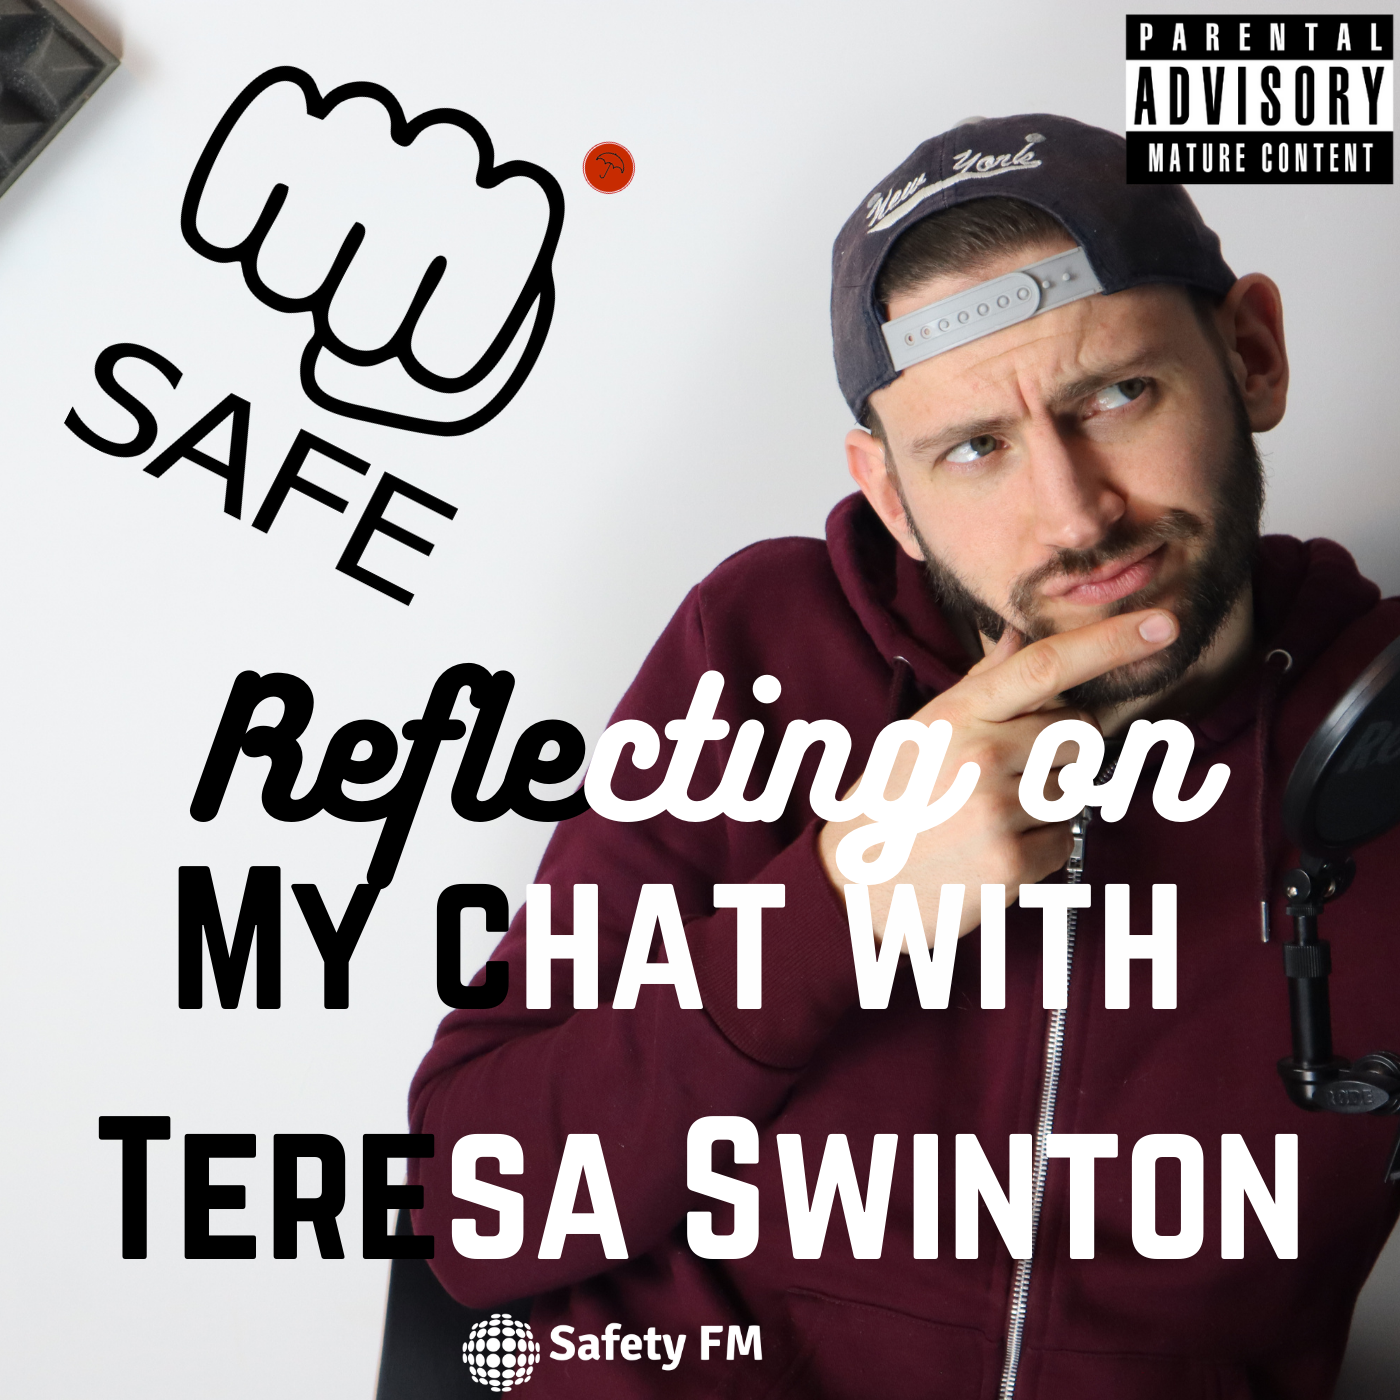 Reflecting on my chat with Teresa Swinton